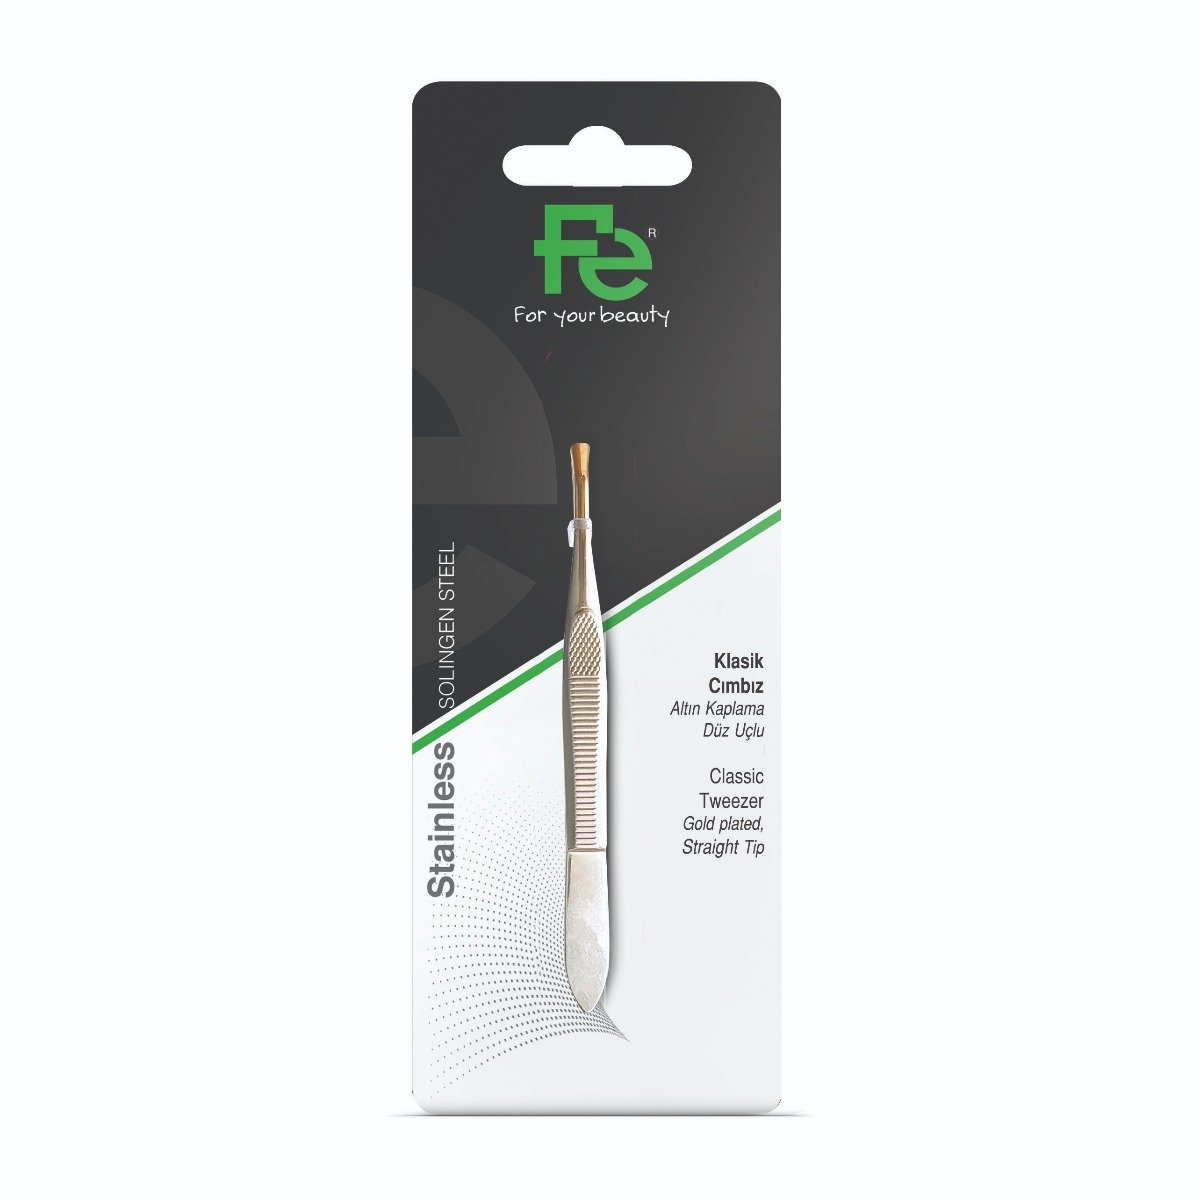 Fe Classic Tweezer Gold Plated Straight Tip - Bloom Pharmacy